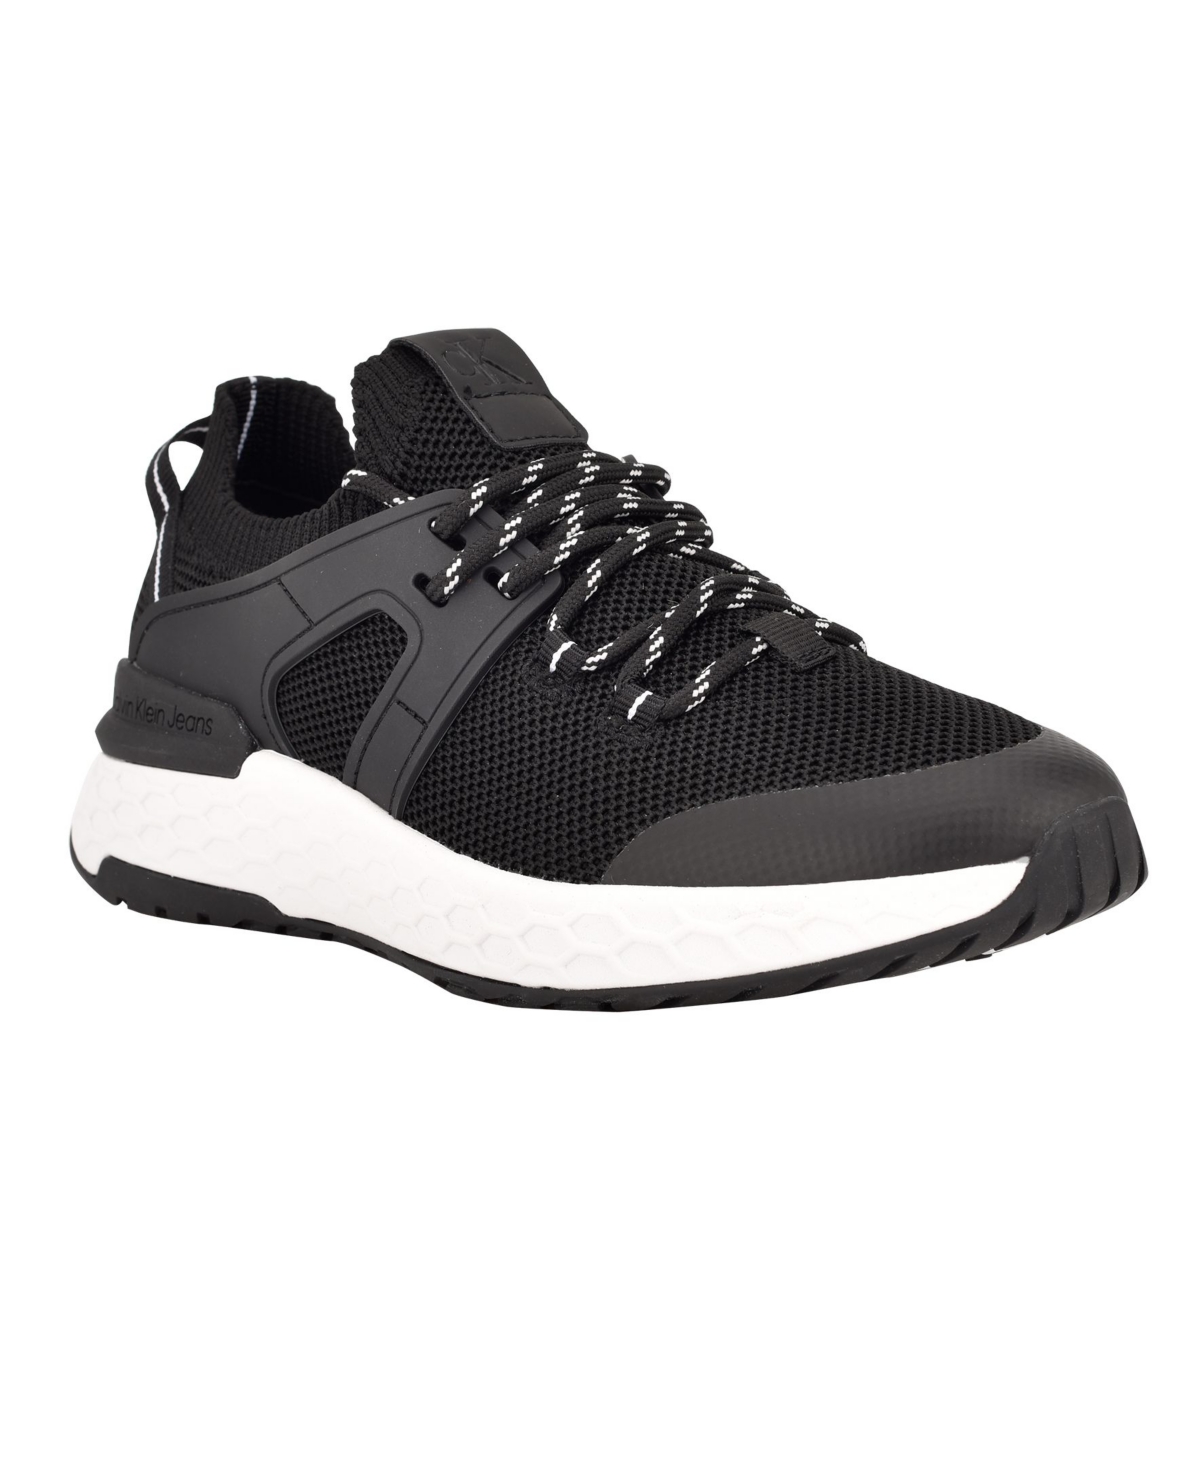 UPC 195972002296 product image for Calvin Klein Women's Aleah Lace-Up Sneakers Women's Shoes | upcitemdb.com